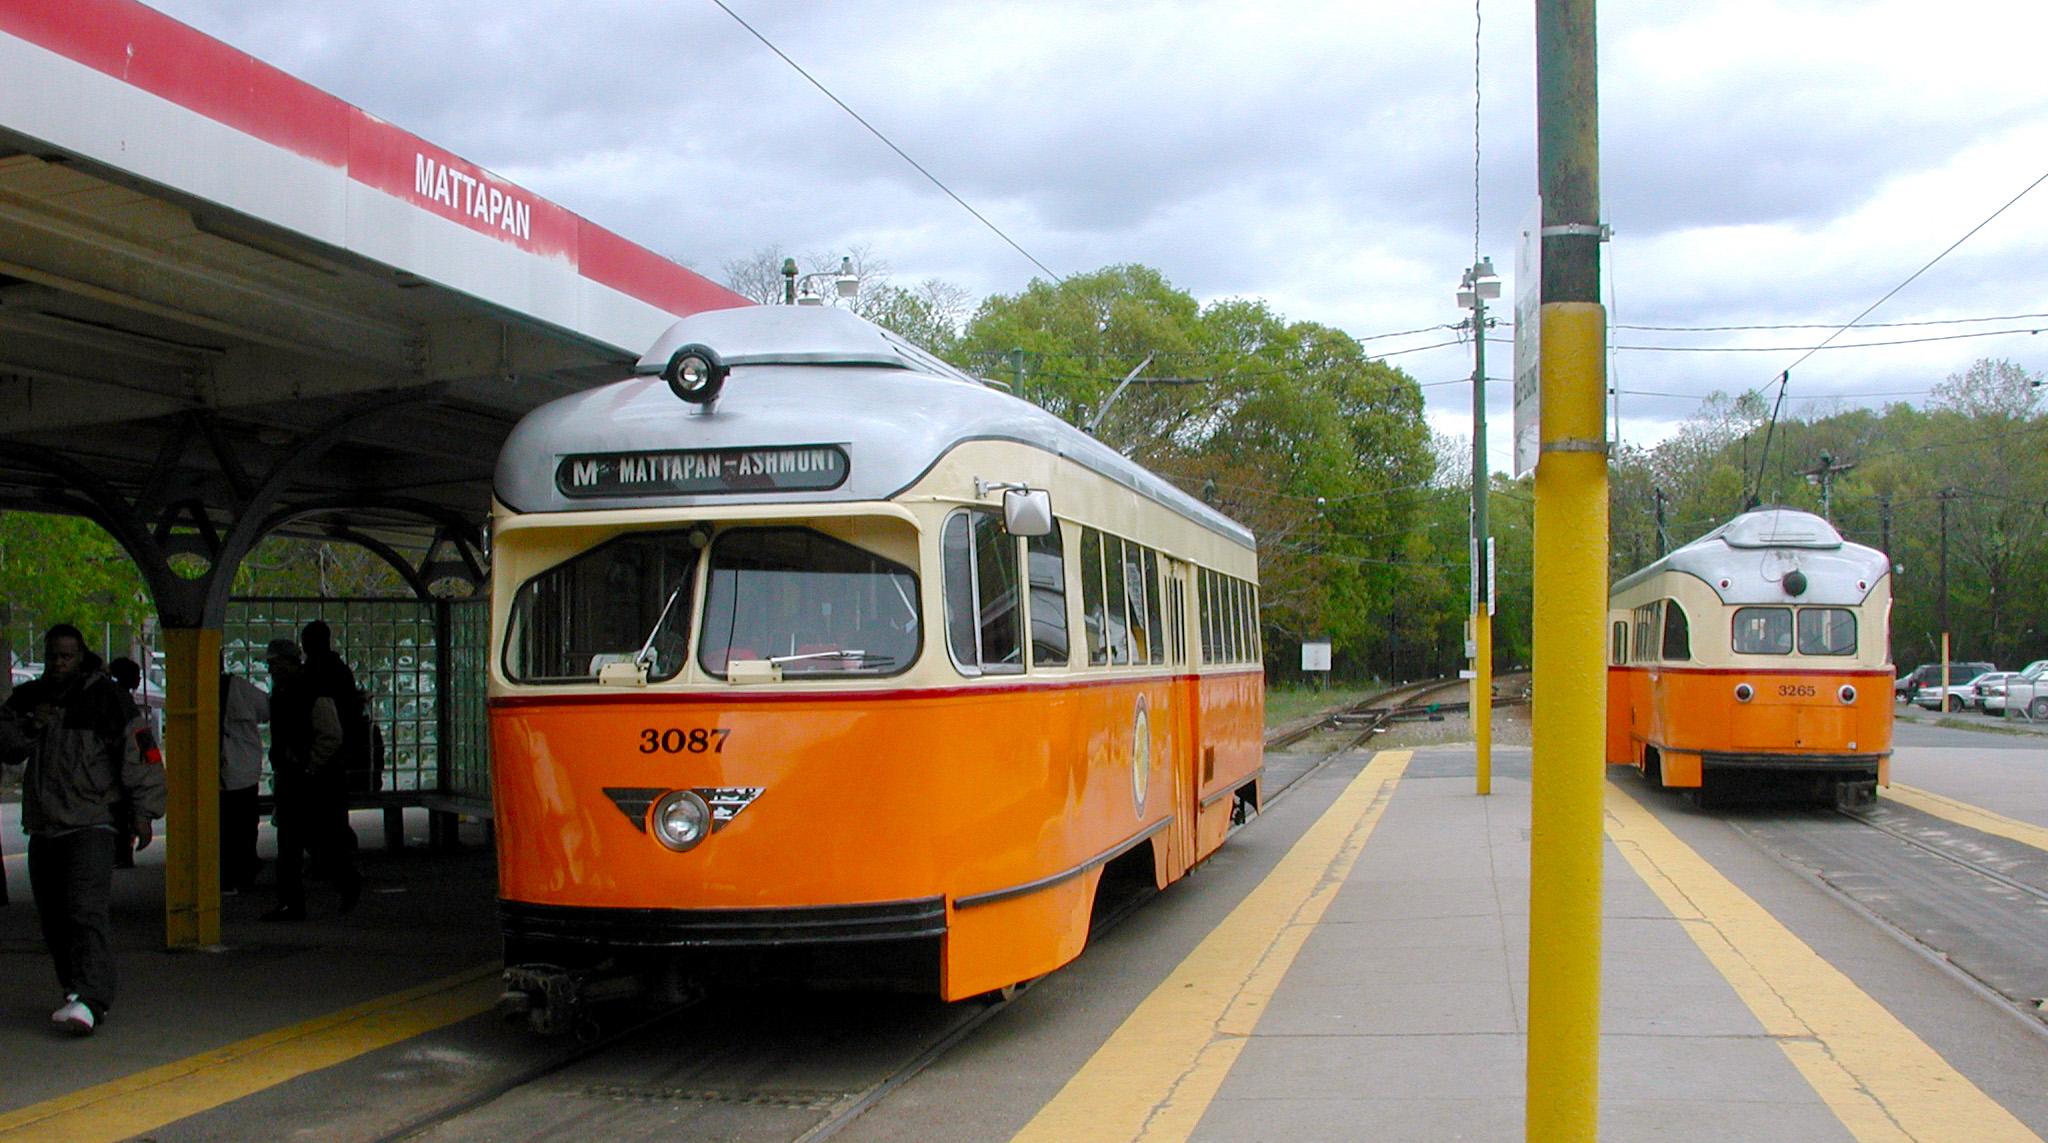 Two trolley cars at the Mattapan stop on the Mattapan Line